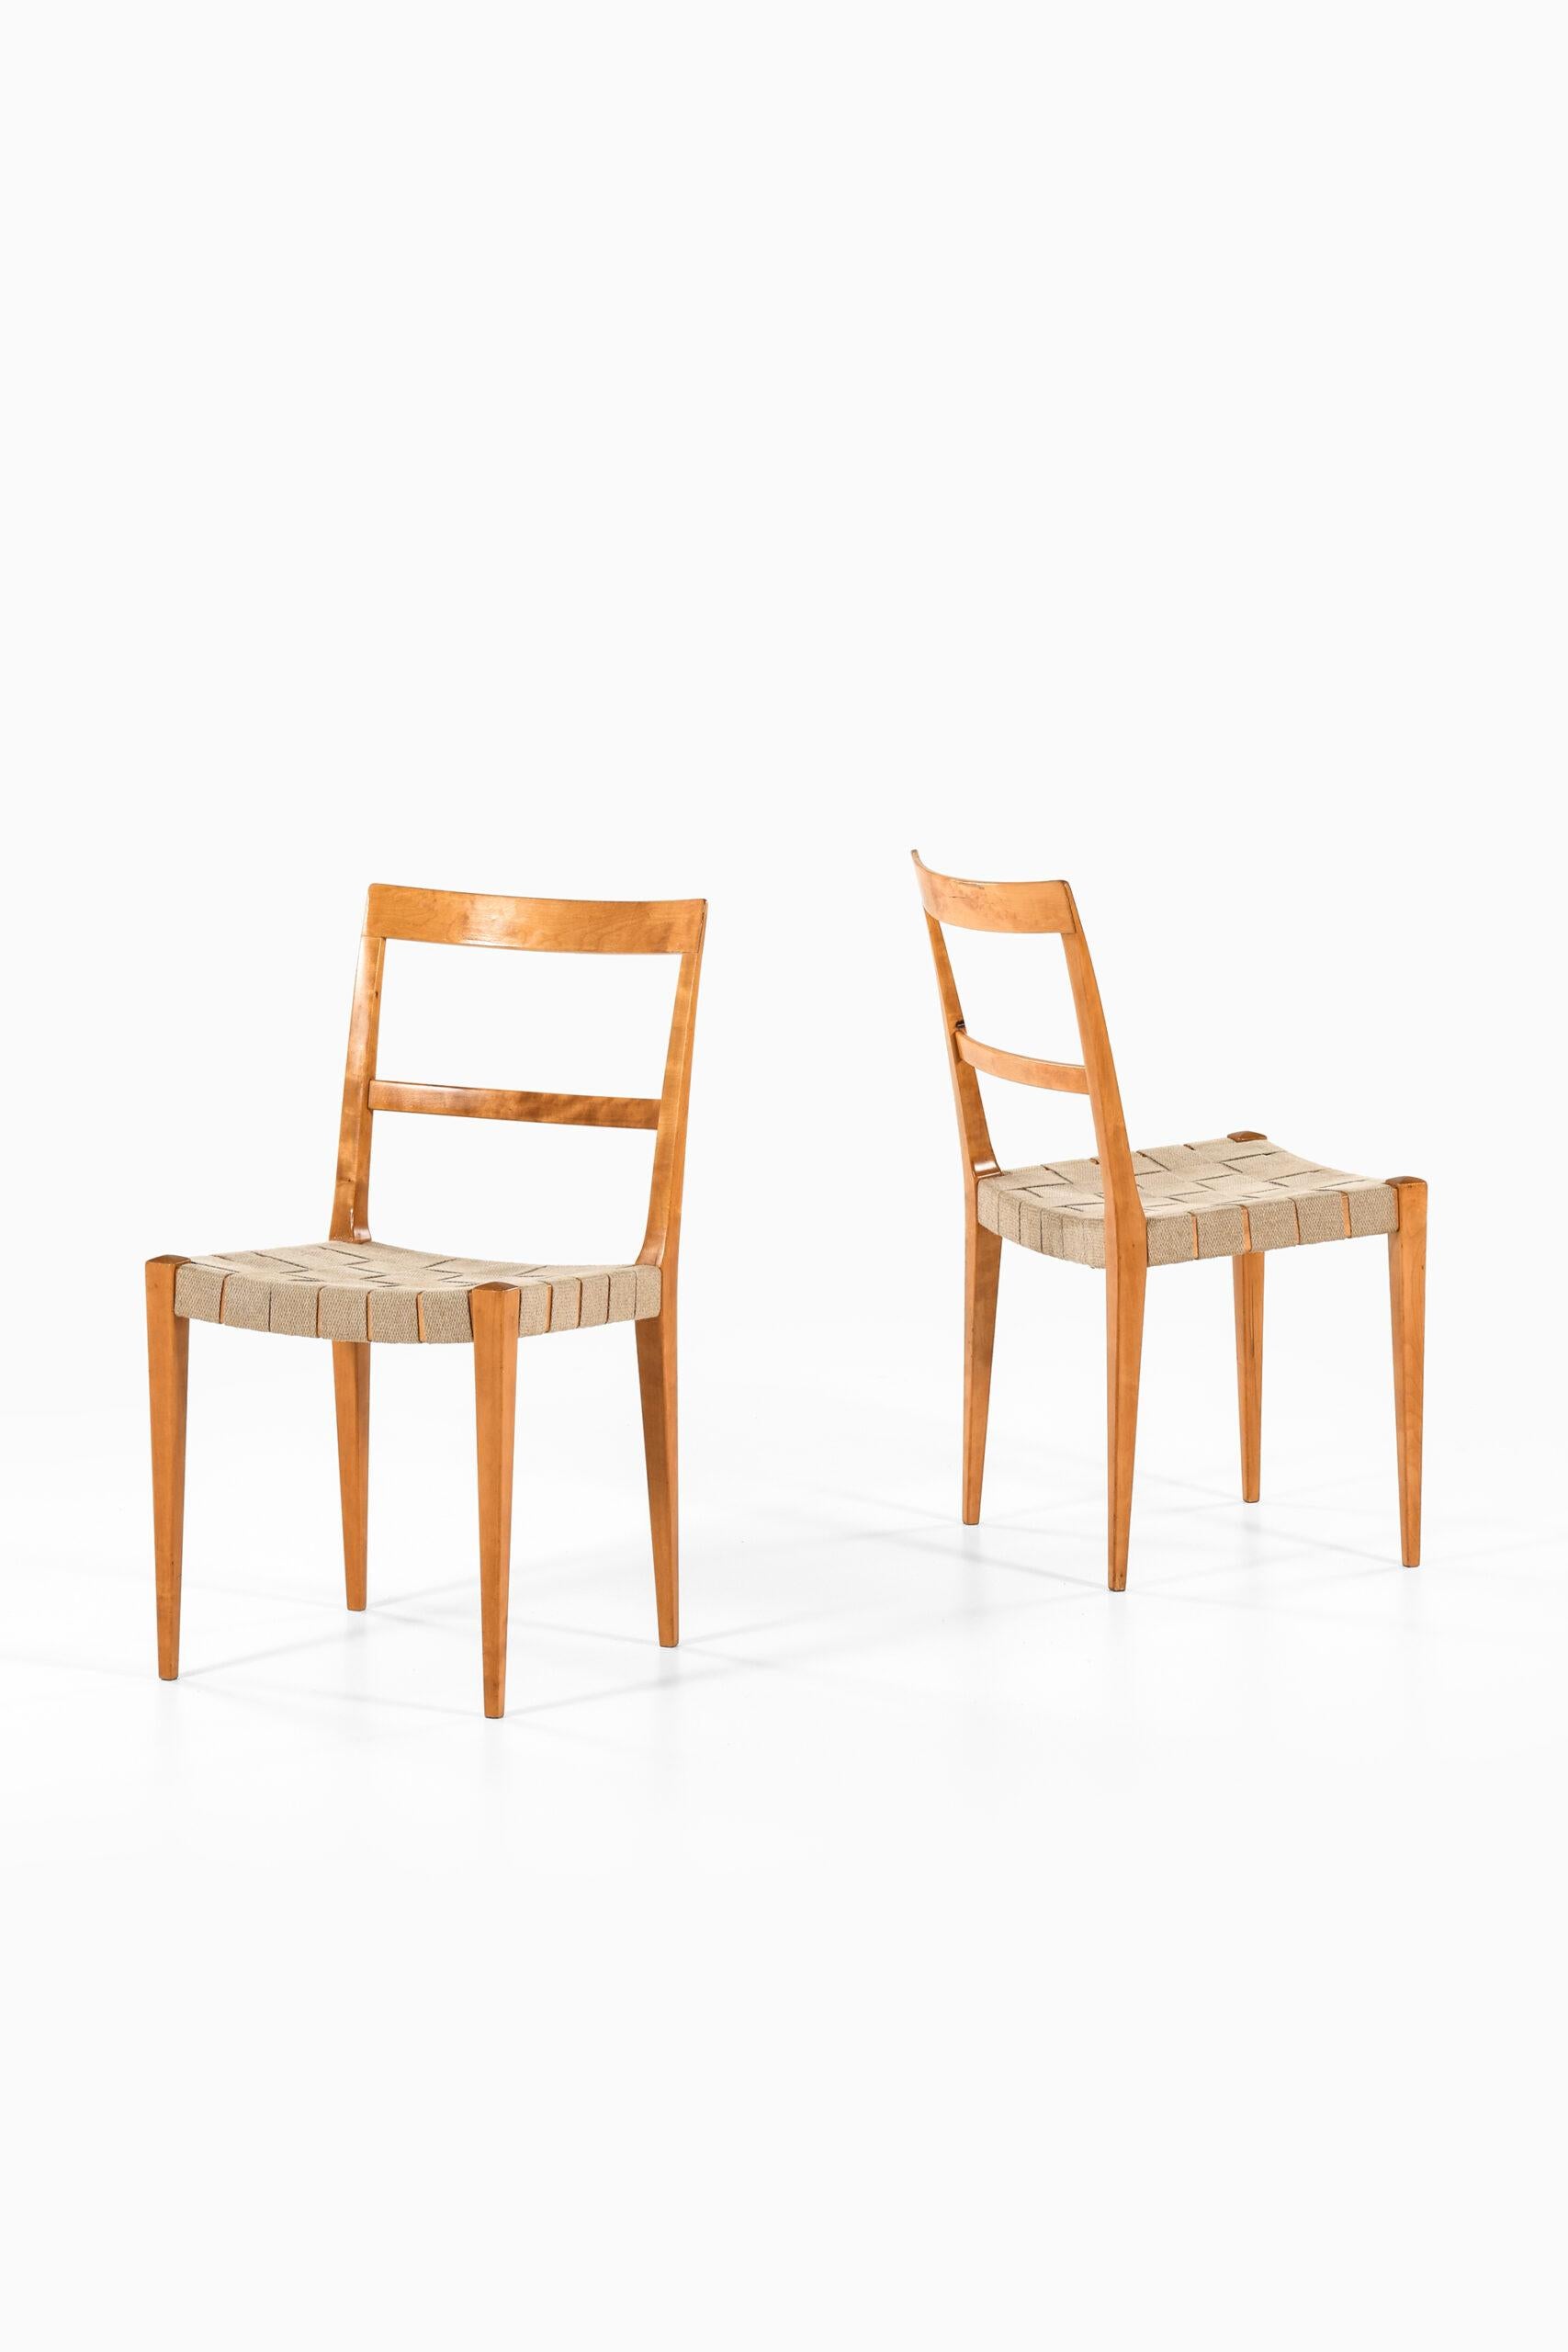 Swedish Bruno Mathsson Dining Chairs Model Mimat Produced by Karl Mathsson in Värnamo For Sale